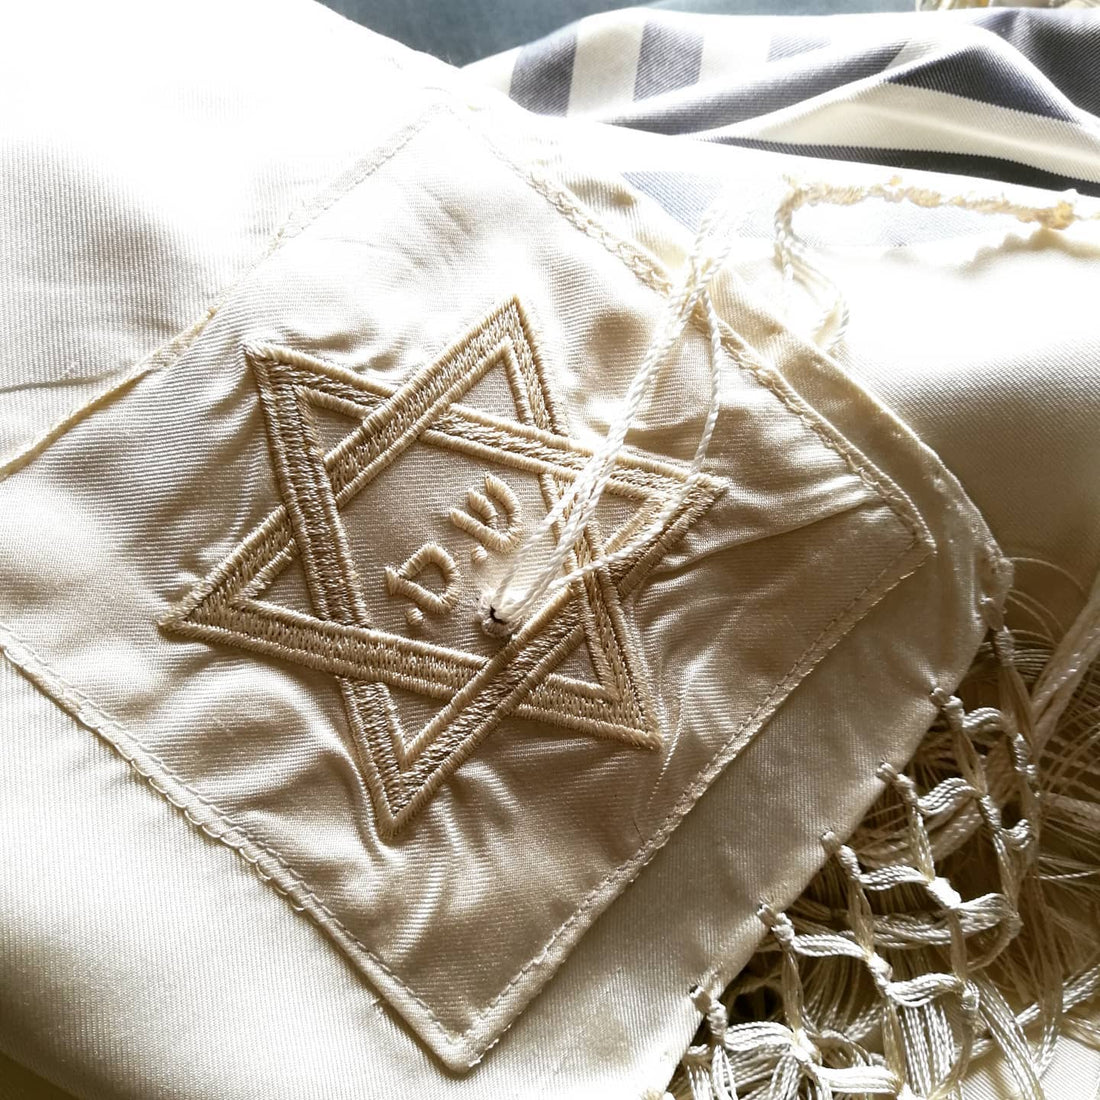 How to make your tallit even more special?